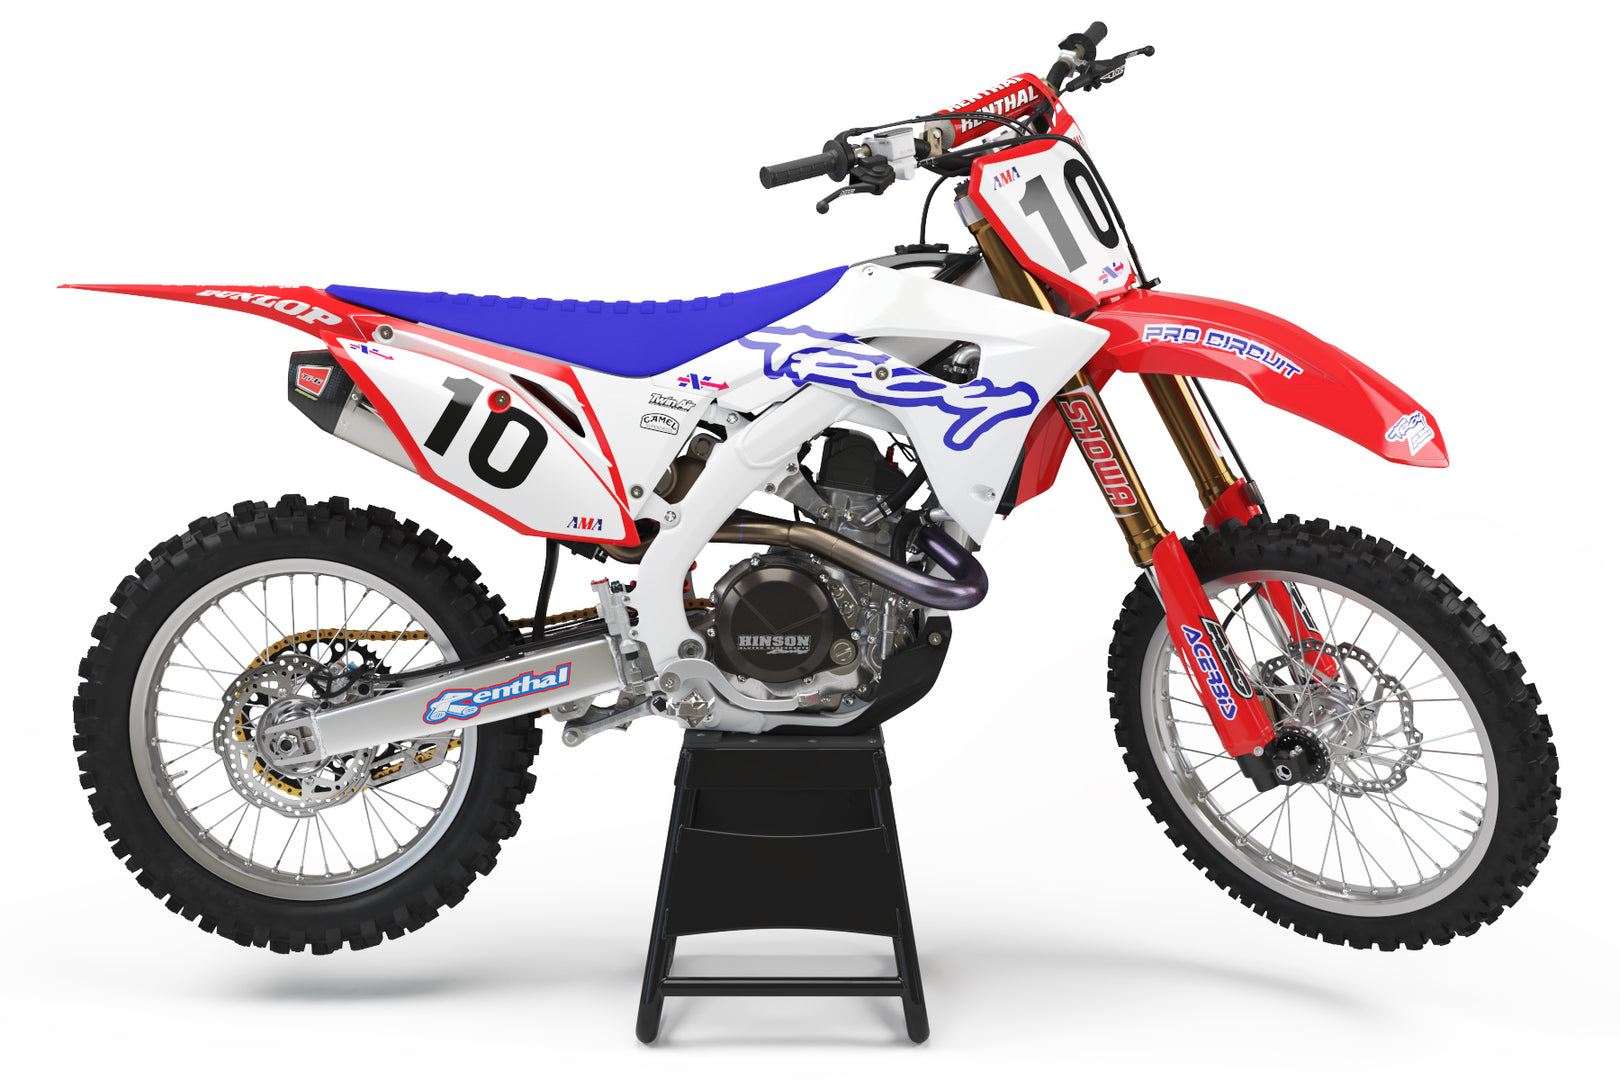 Ready-Made | 1995 Troy Graphic Kit Fits HONDA